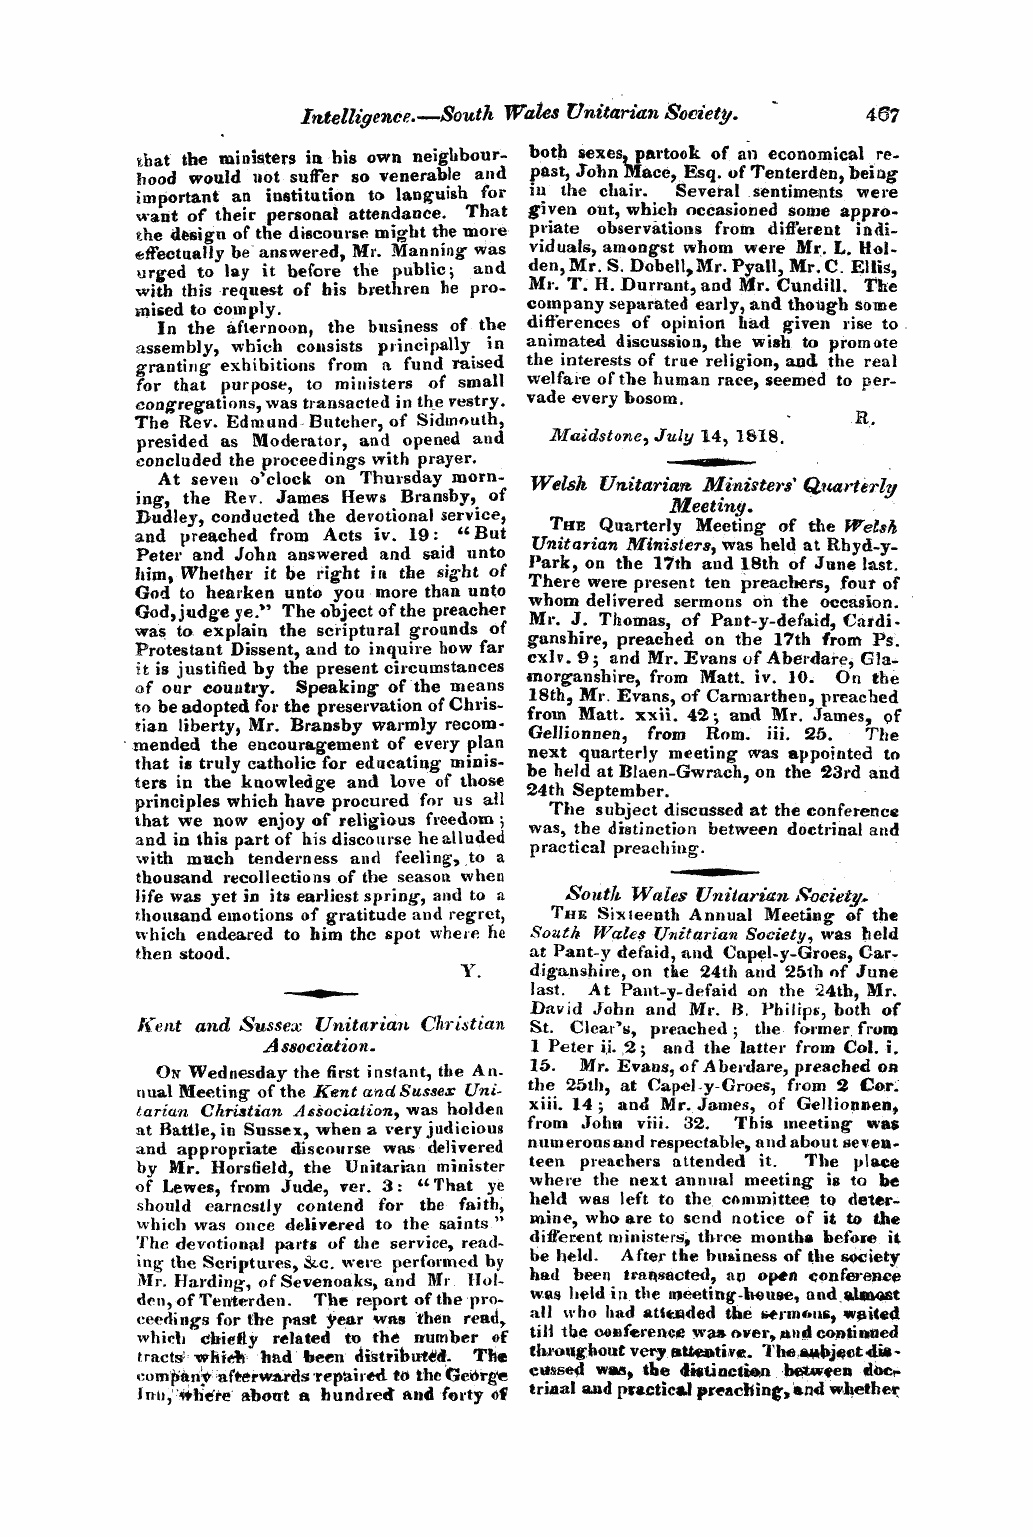 Monthly Repository (1806-1838) and Unitarian Chronicle (1832-1833): F Y, 1st edition: 59